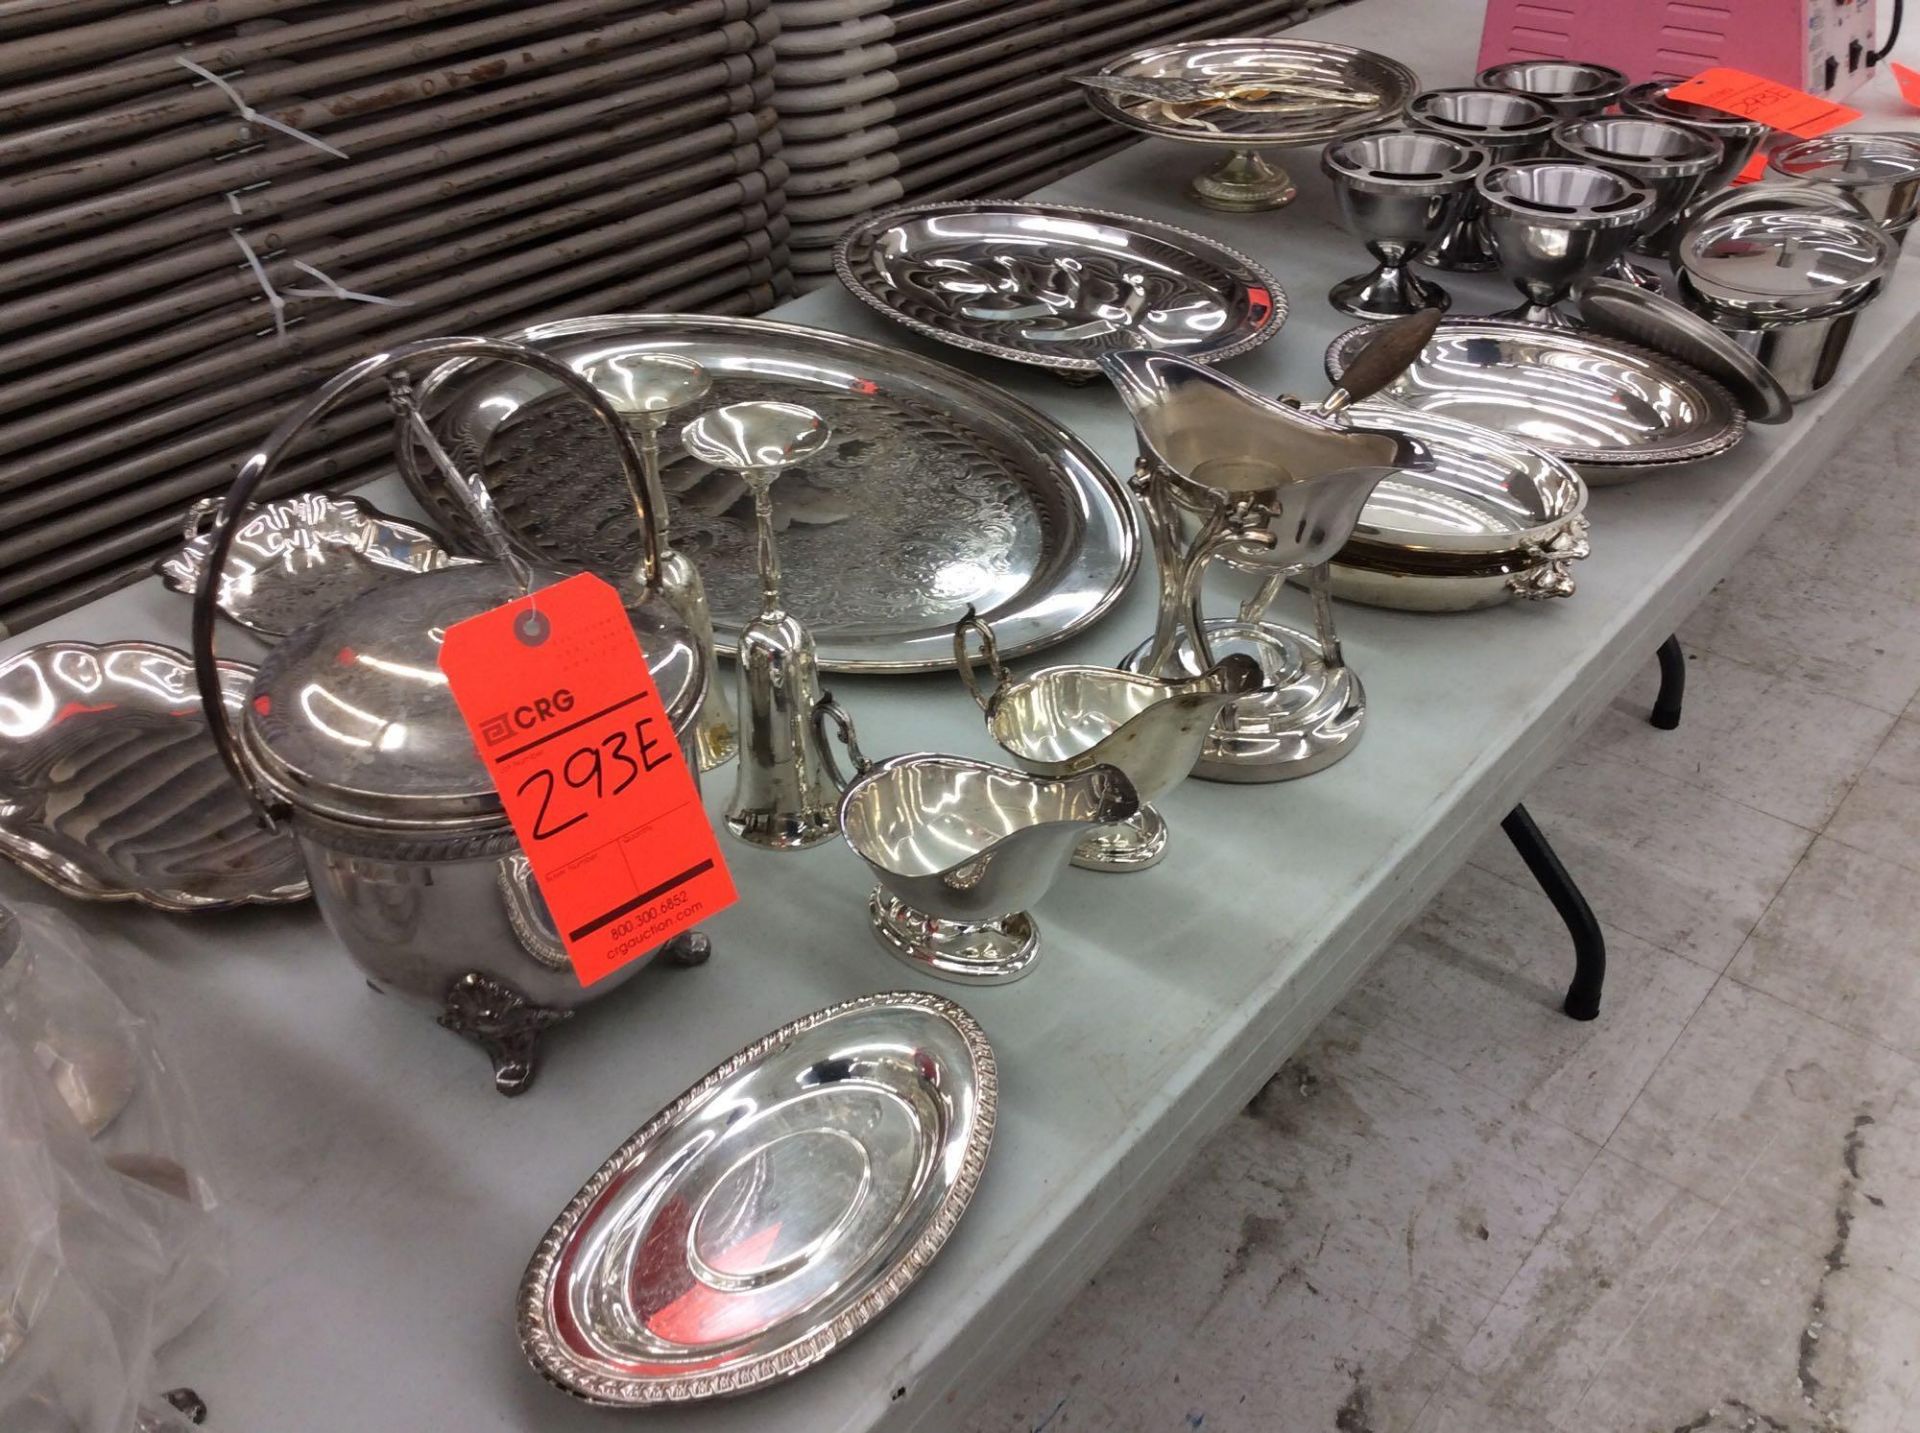 Lot of asst silver-plated and stainless serving trays, bowls, gravy boats, etc.